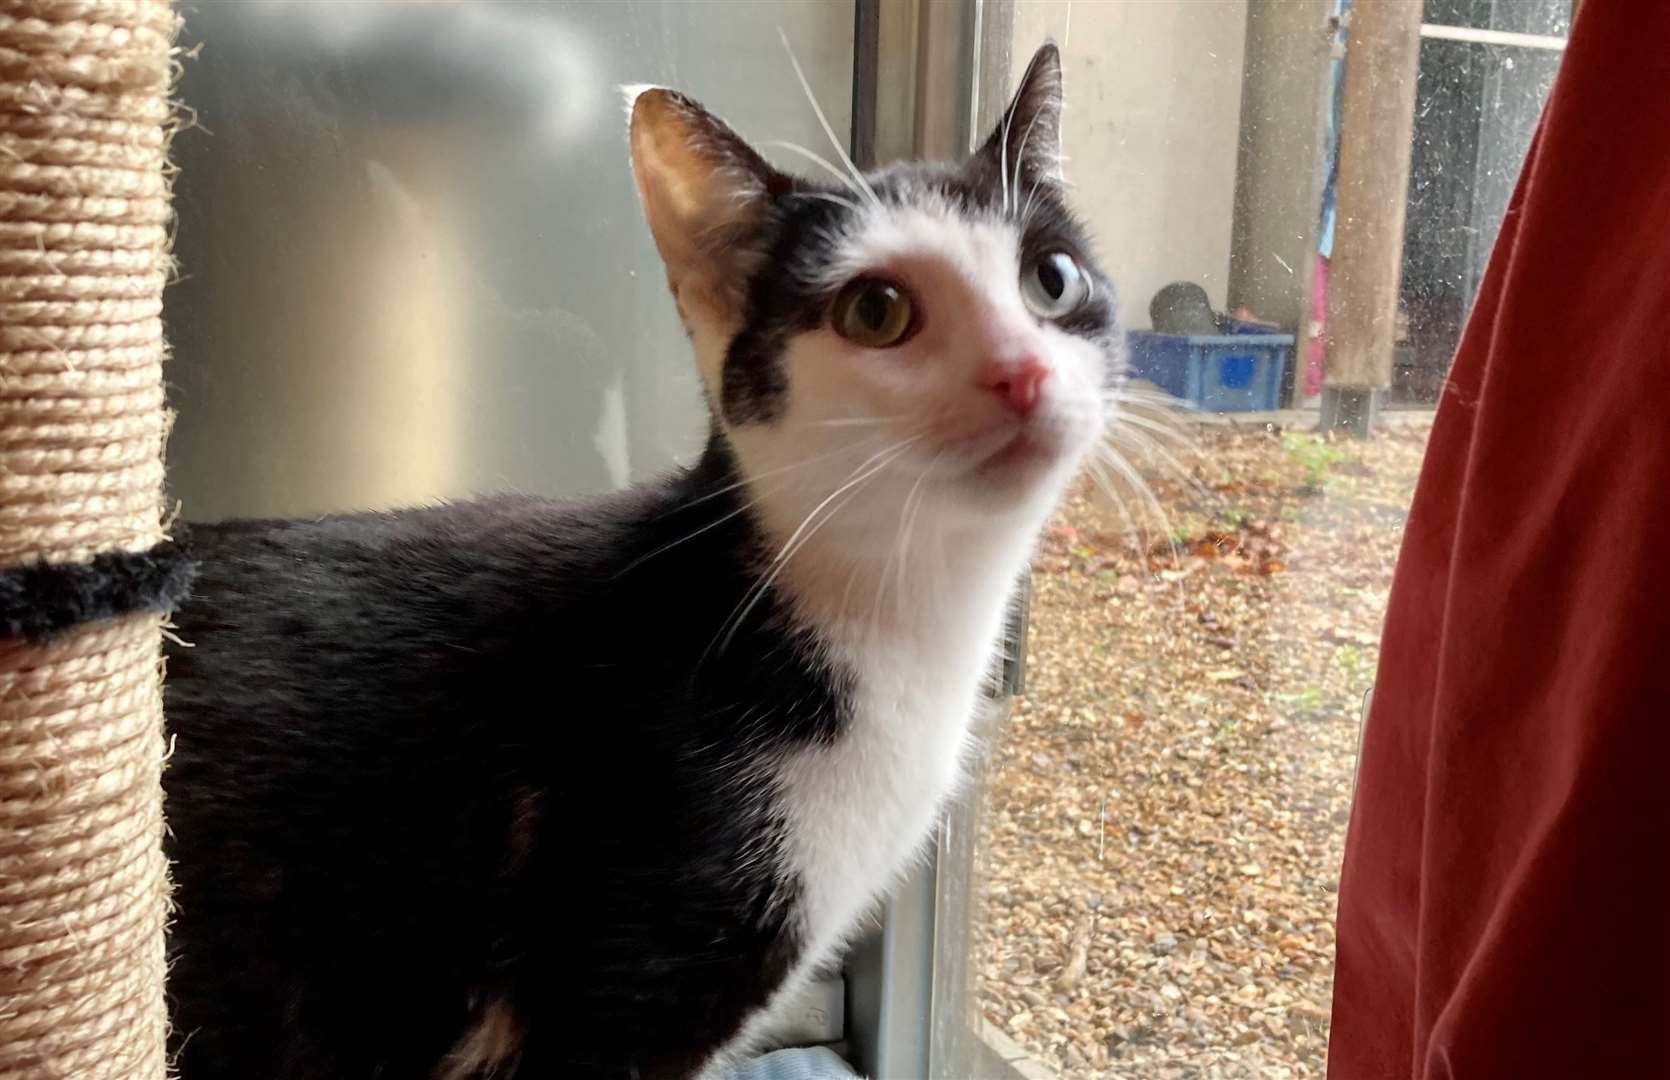 One-year-old Ariel came into Battersea's care as a pregnant stray and was fostered by Tina Moore